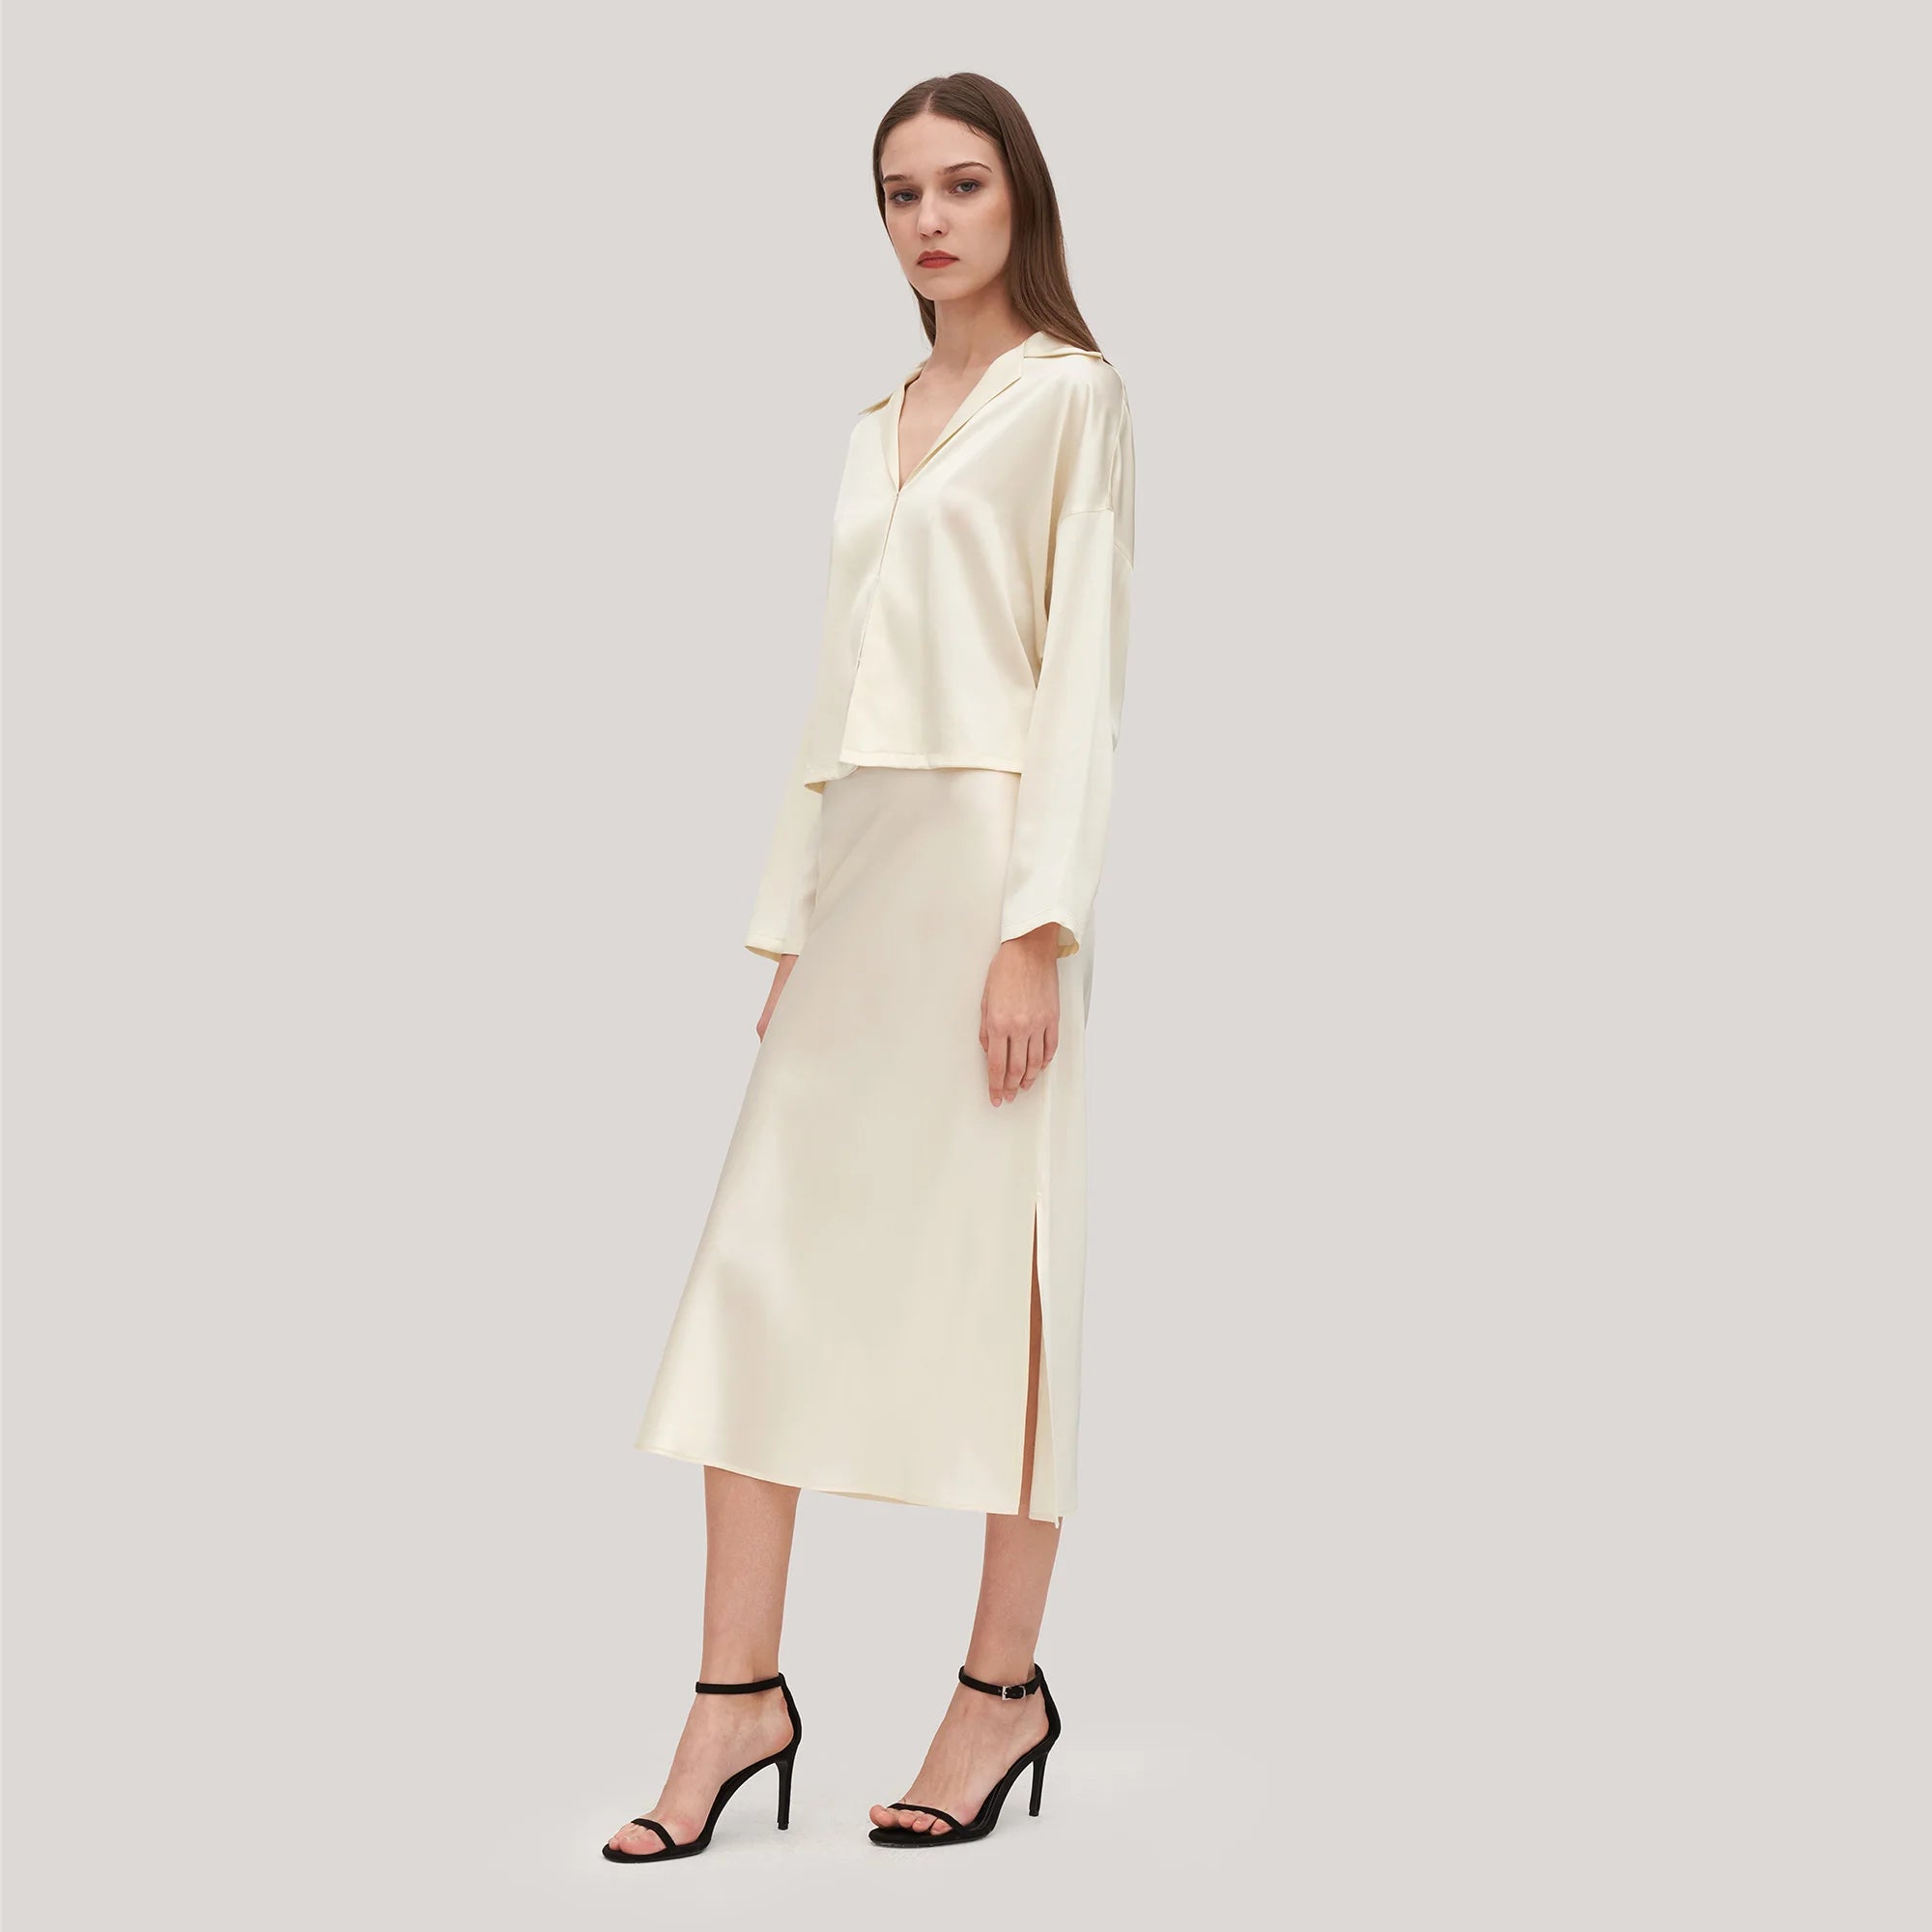 The Ensemble Adeline is the ultimate ladies essential, featuring a minimalist aesthetic with a silk poppy skirt, side slit bottom and femme fit. Perfect for your wardrobe, this ensemble is sure to give your wardrobe an upgrade.